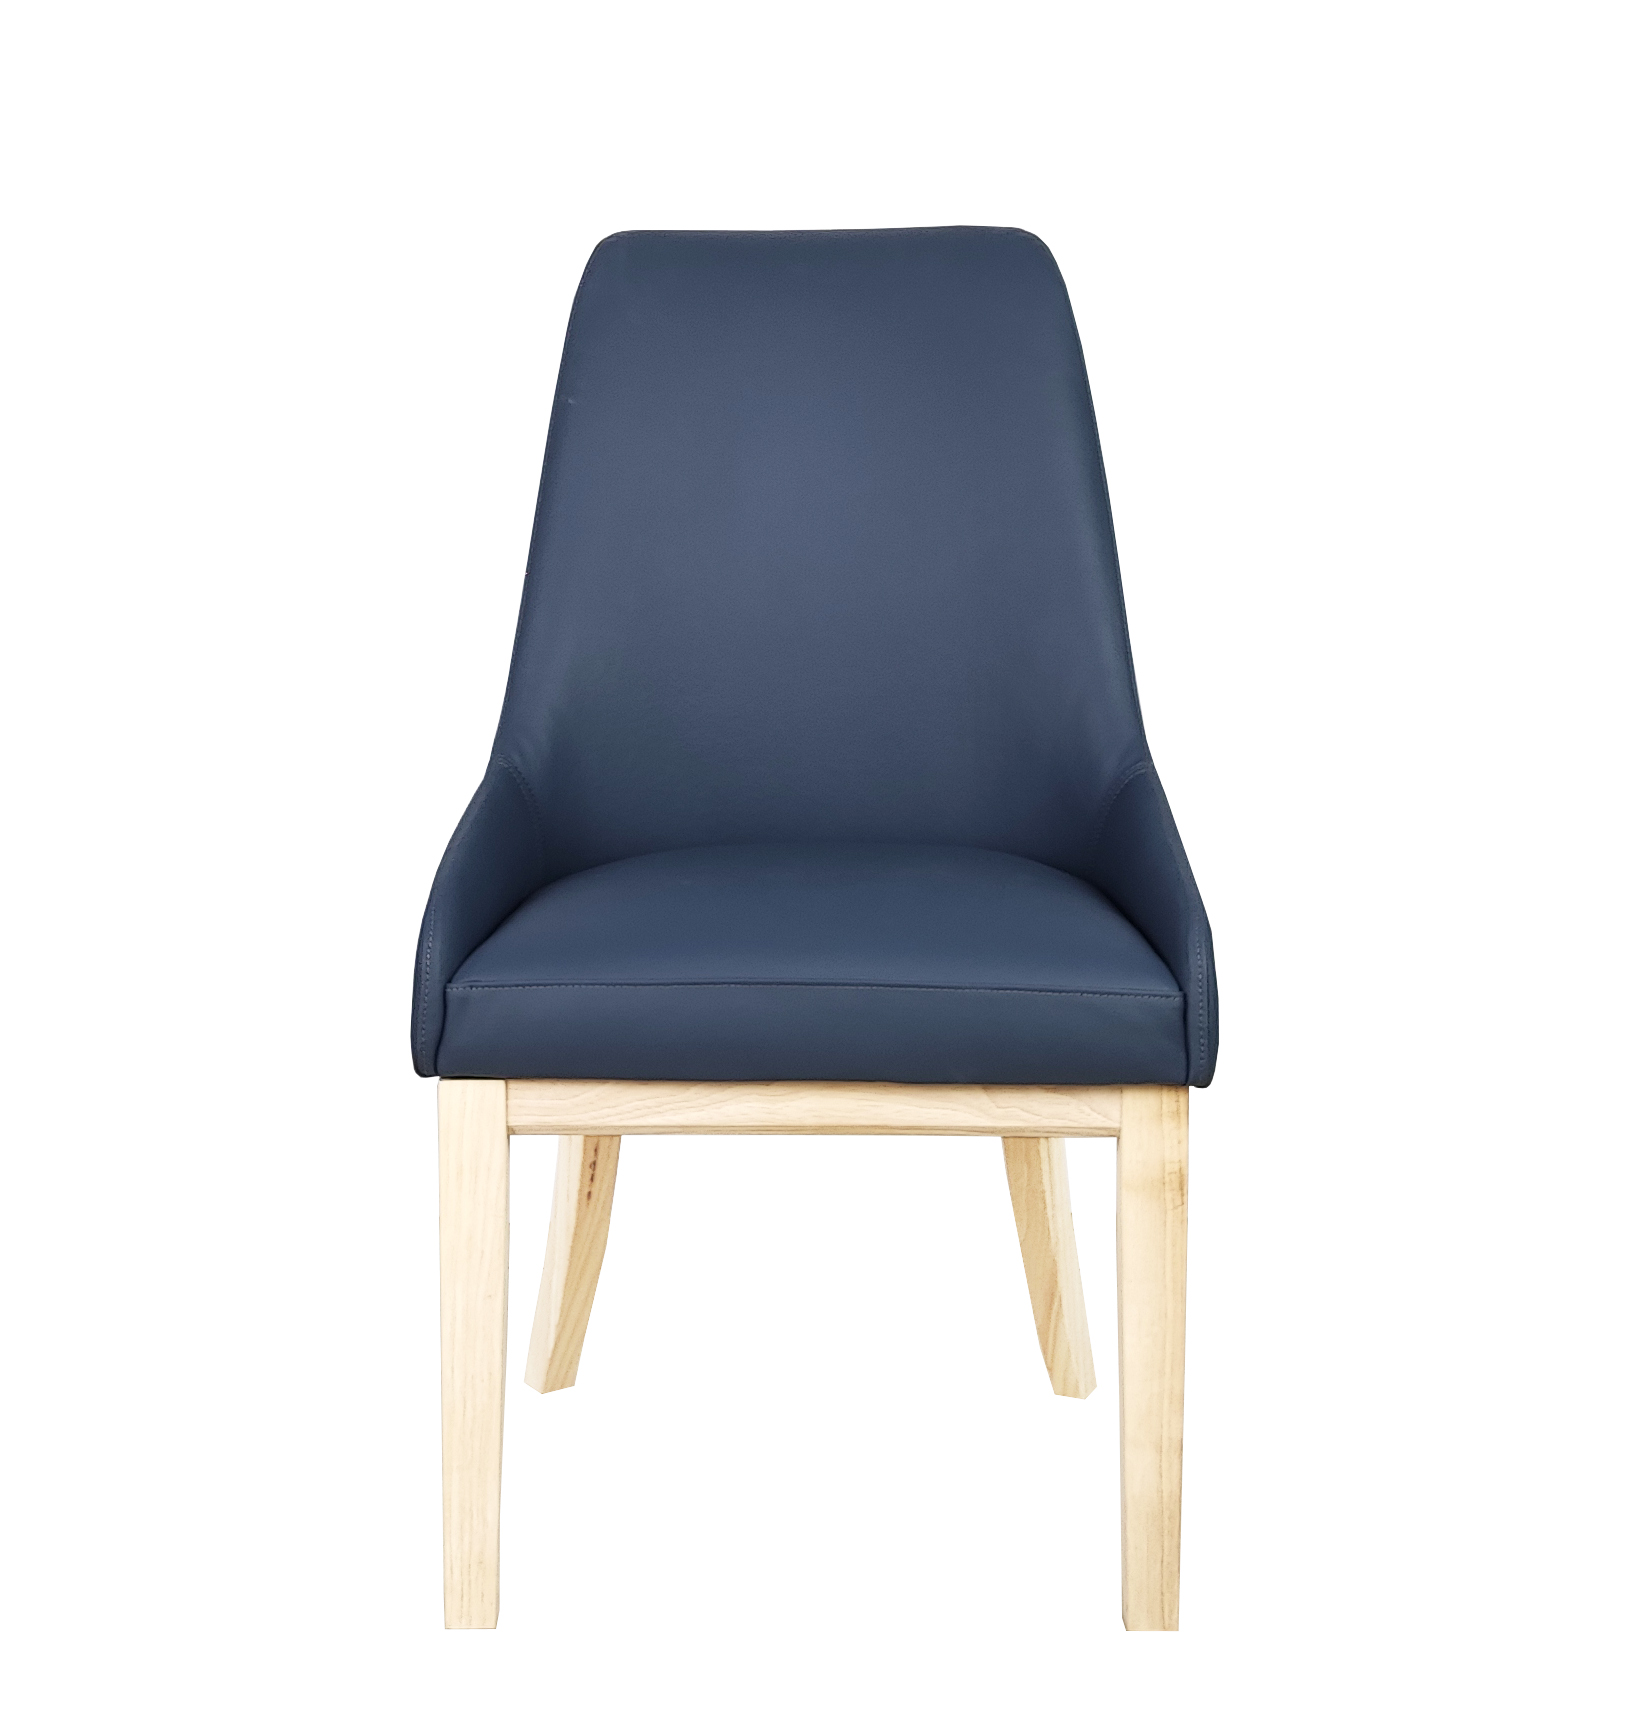 Genuine Leather Dining Chairs Australia, Blue Dining Chairs Australia